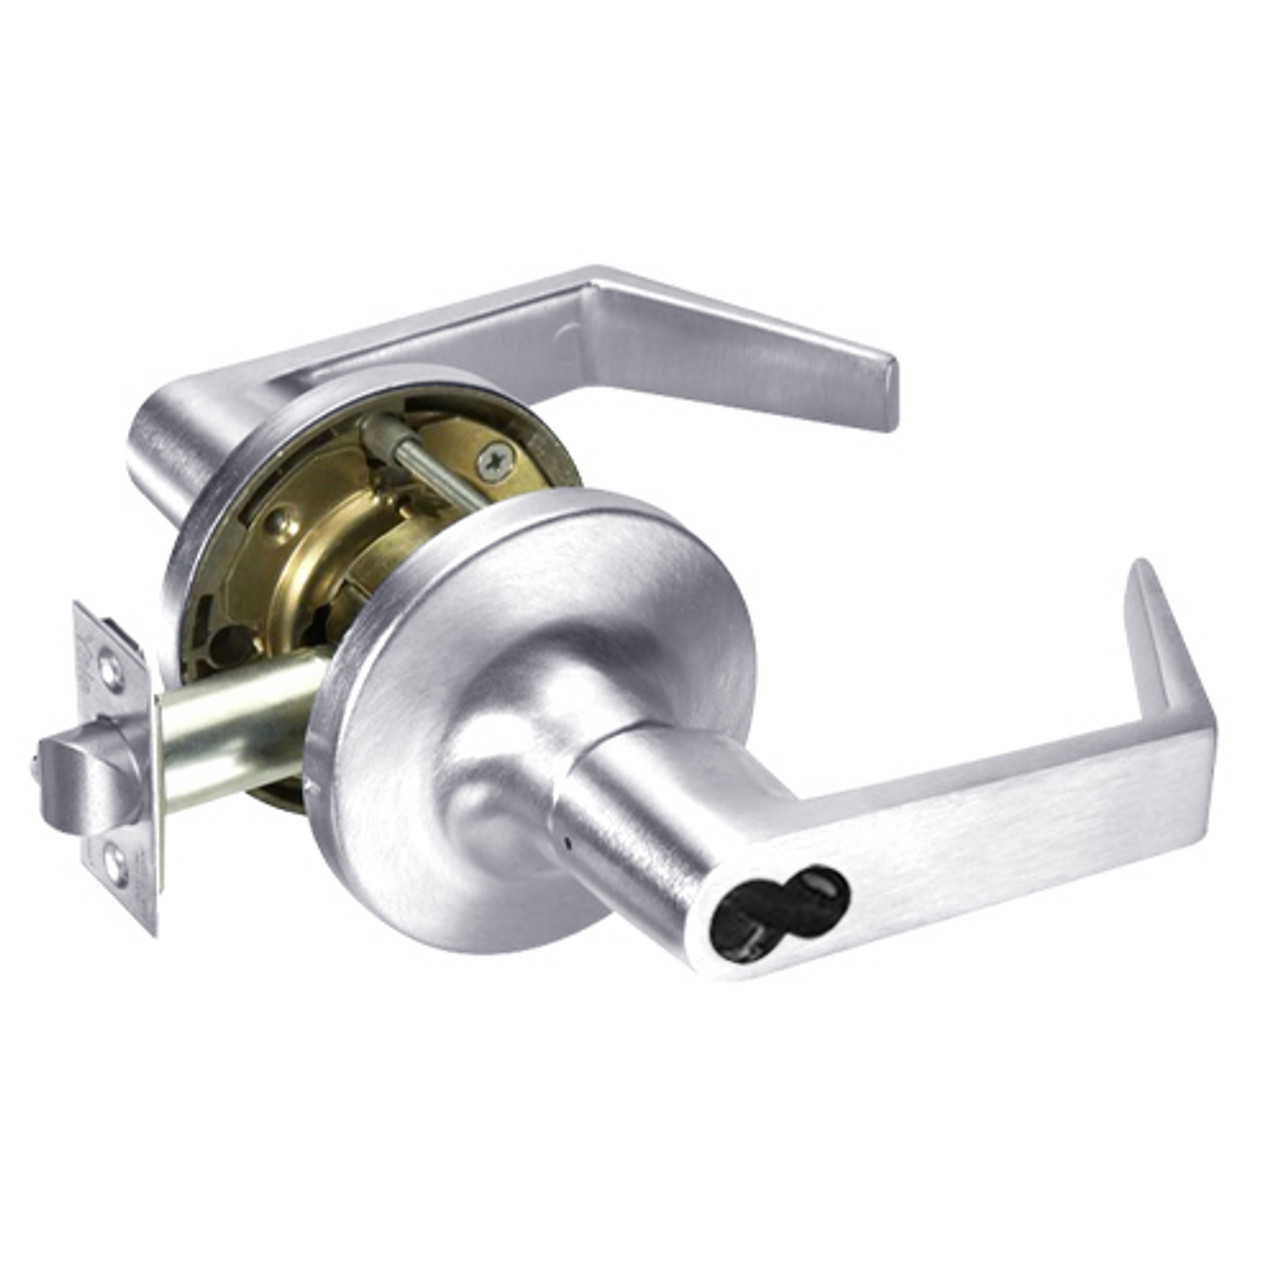 M-AU5408LN-625 Yale 5400LN Series Single Cylinder Classroom Cylindrical Locks with Augusta Lever Prepped for Medeco-ASSA IC Core in Bright Chrome